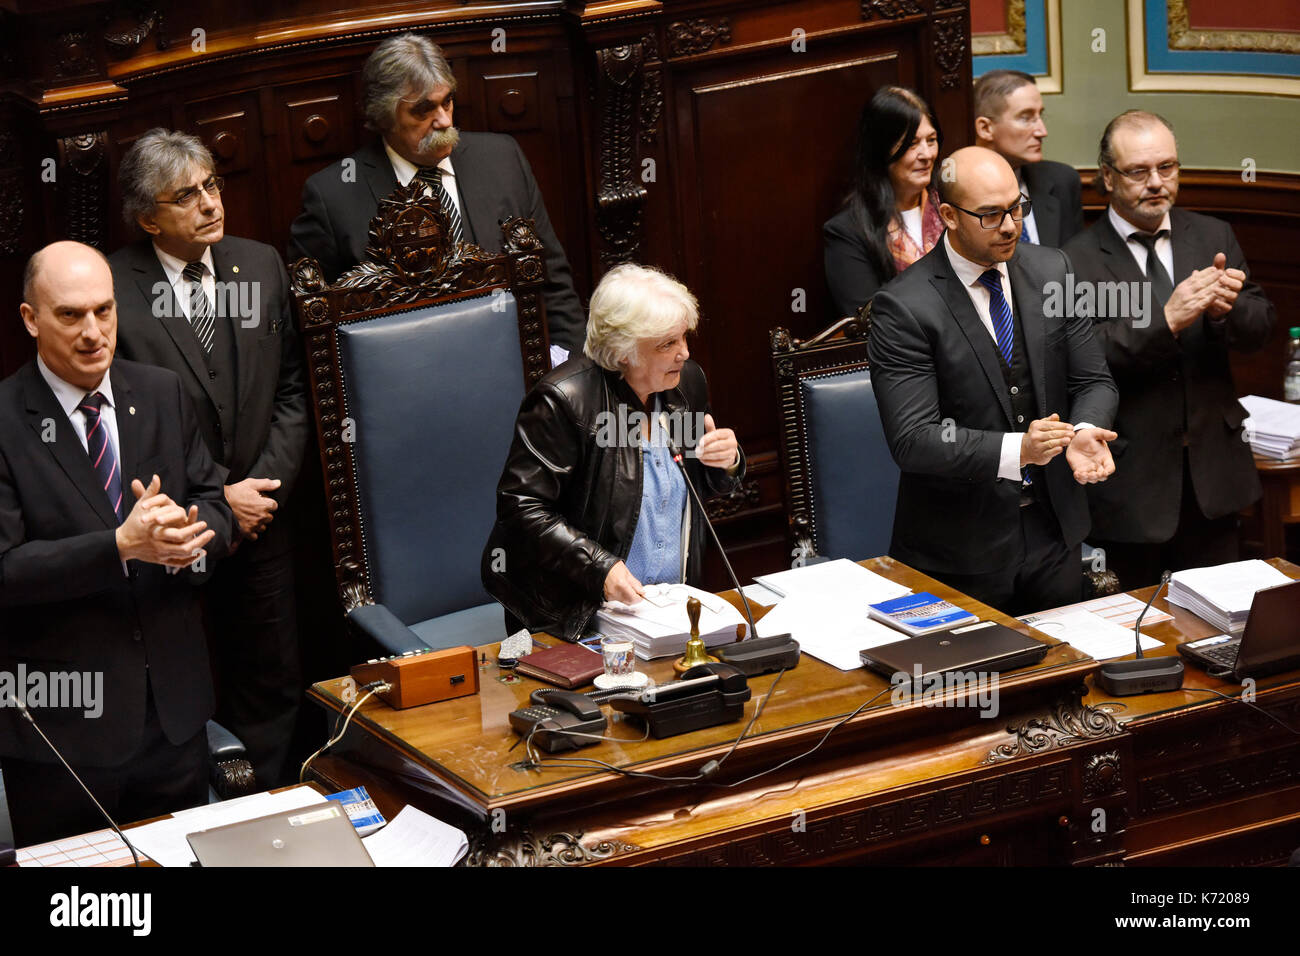 Montevideo, Uruguay. 13th Sep, 2017. Uruguay's new Vice President and President of the Parliament's General Assembly Lucia Topolansky (C) takes part in a session in the Legislative Palace in Montevideo, Uruguay, on Sept. 13, 2017. Senator Lucia Topolansky, wife of former President Jose Mujica, became the new vice president of the country on Wednesday, after the Parliament's General Assembly accepted the resignation of Raul Sendic. Credit: Nicolas Celaya/Xinhua/Alamy Live News Stock Photo